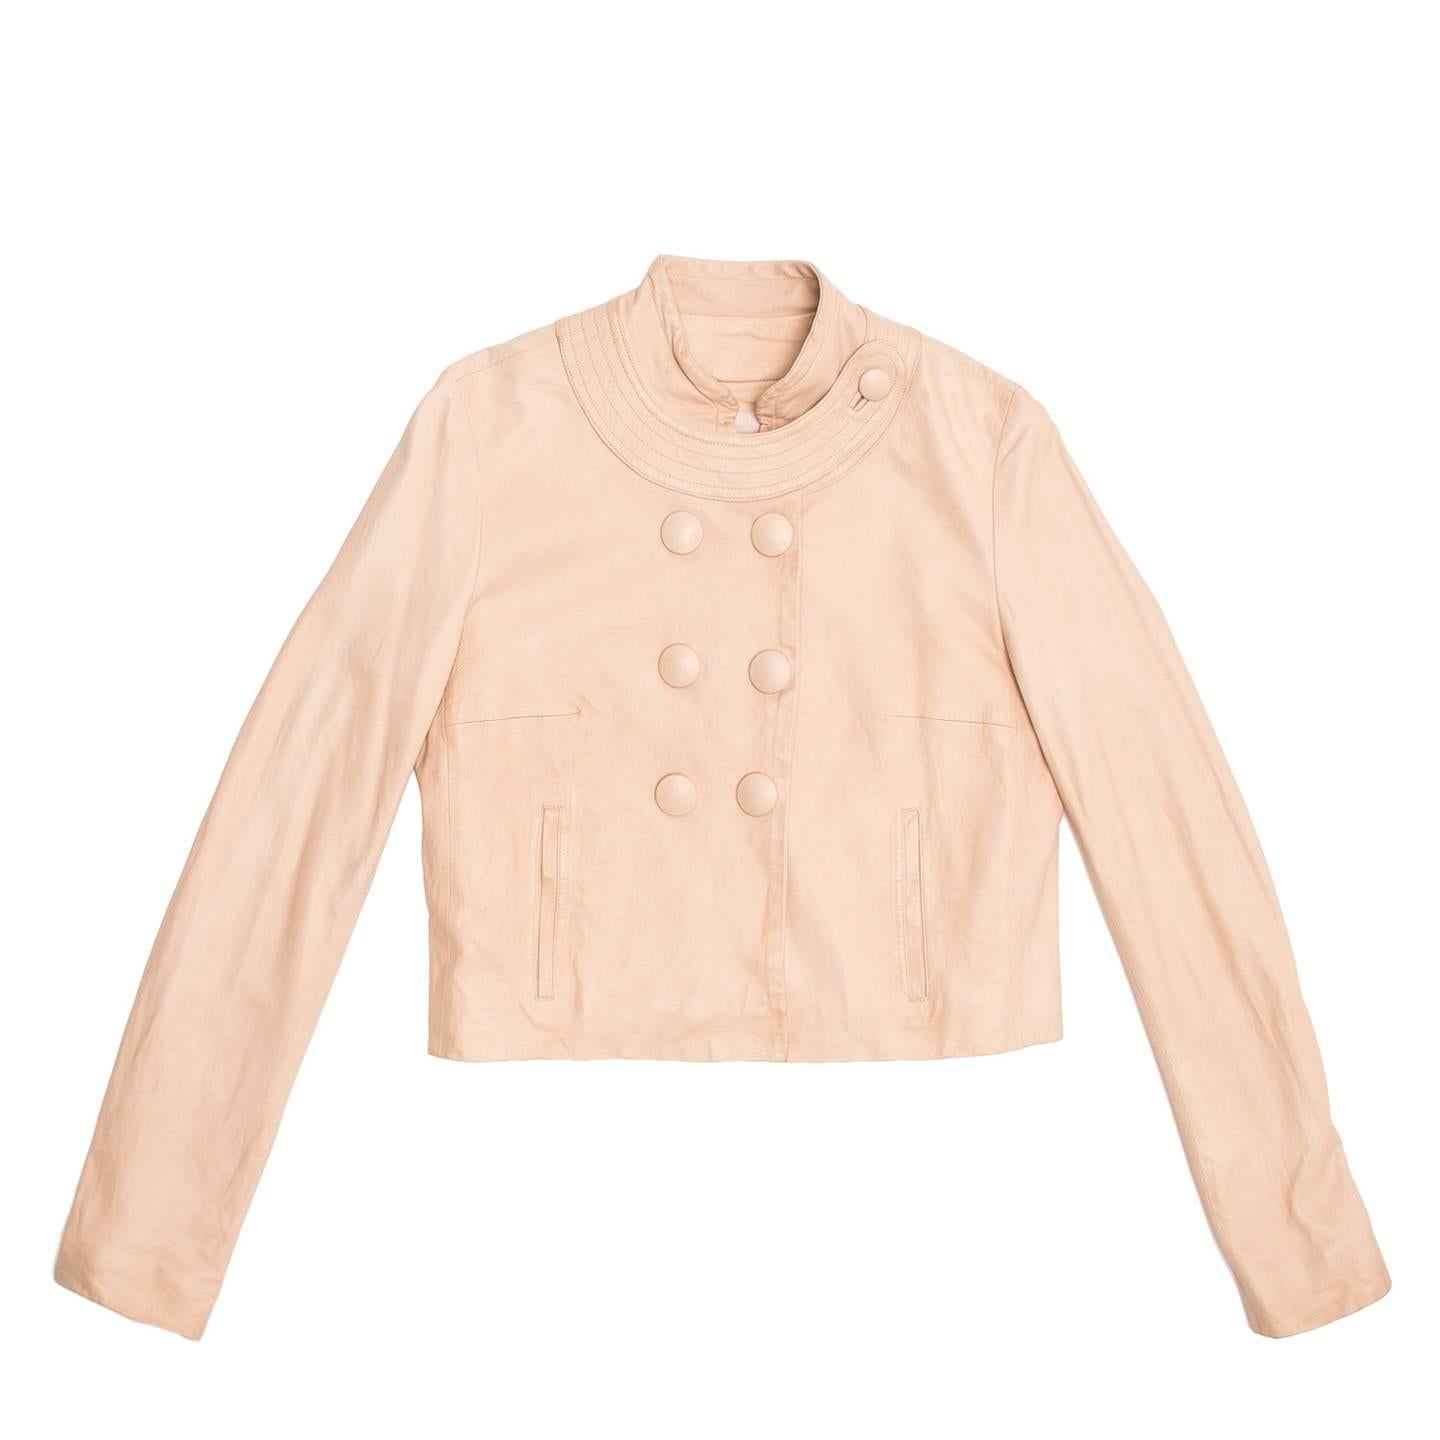 Pale pink lambskin jacket with mandarin collar. Under the standing collar a round one is applied and closes on the left shoulder with a leather covered button to match the bigger ones of the double breast closure. The bottom collar is enriched with